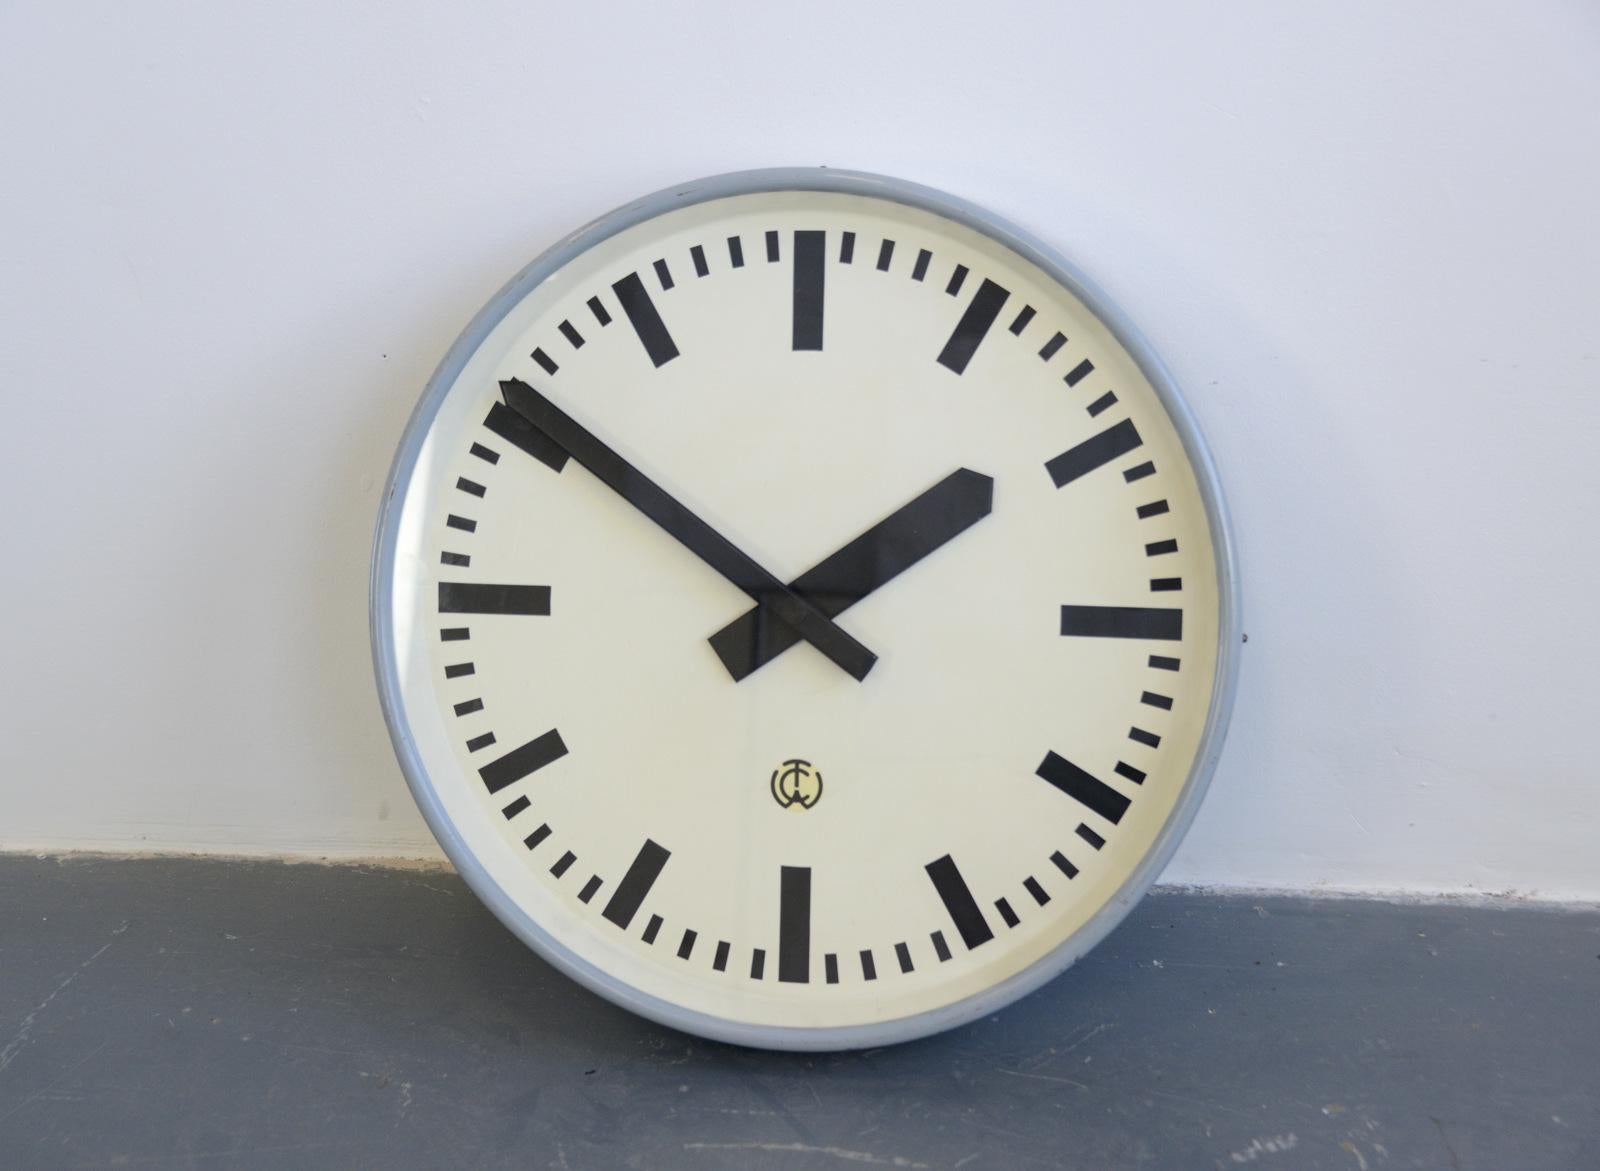 Large German factory clock, circa 1950s

- Steel casing and dial
- Glass face
- Original hands
- New high torque quartz motor
- AA battery powered
- German, 1950s
- Measures: 55cm x 55cm x 8cm 

Condition report

Fully restored and